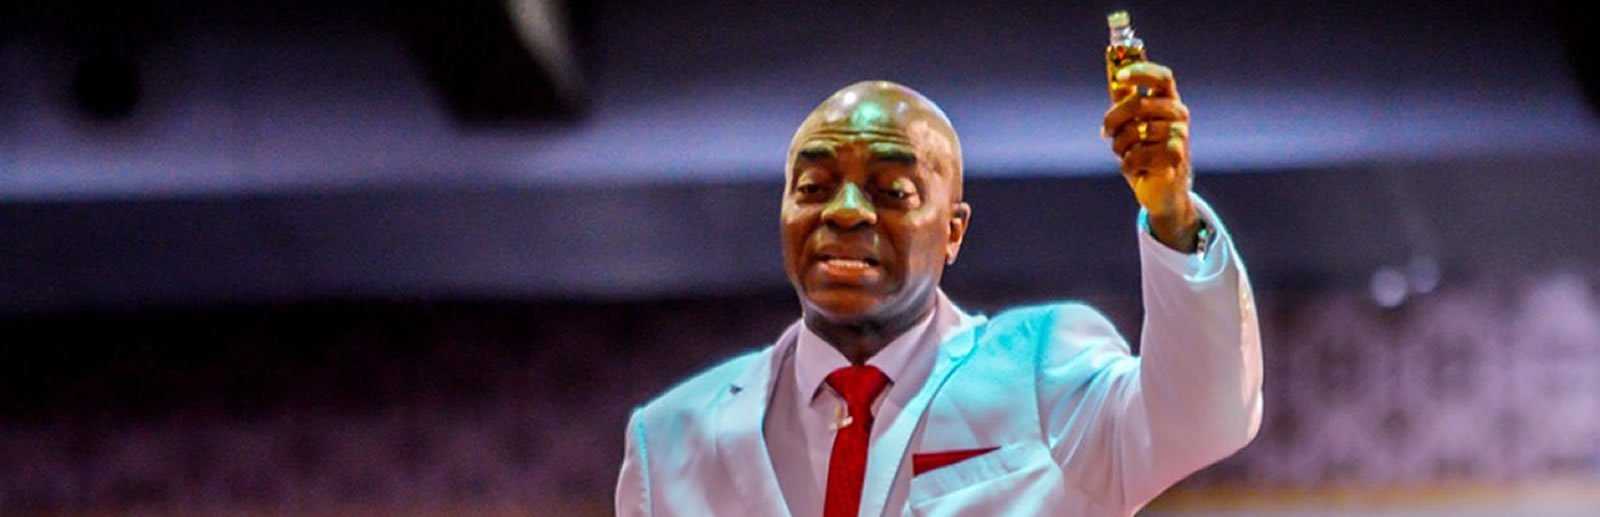 Bishop David Oyedepo Holding a bottle of anointing oil